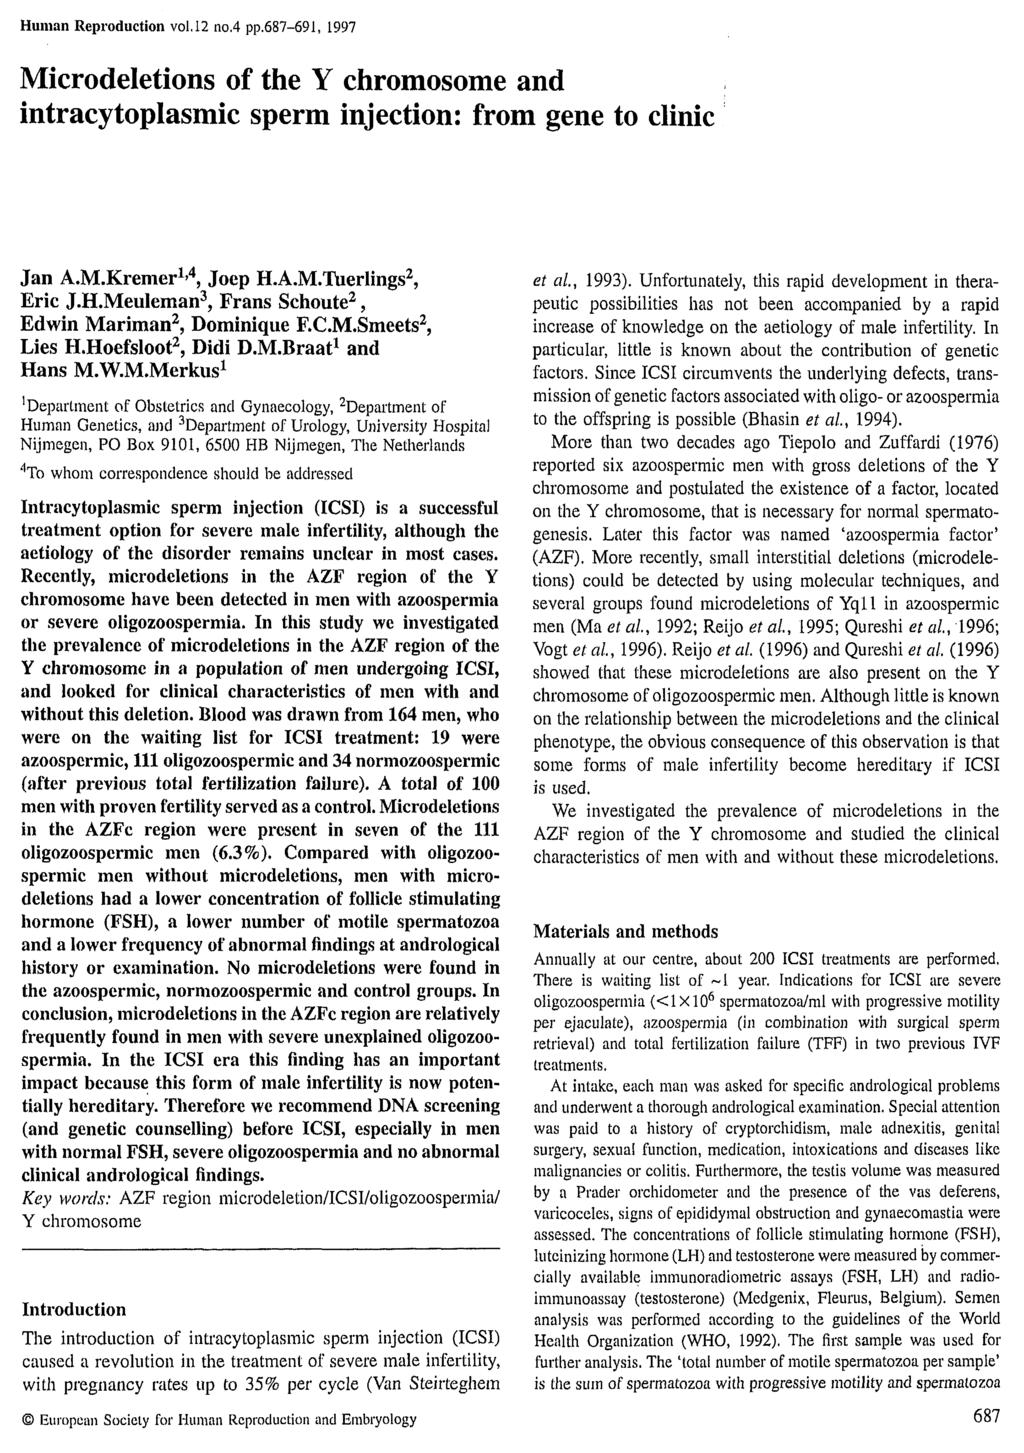 Human Reproduction vol. 12 no.4 pp.687-691, 1997 Microdeletions of the Y chromosome and intracytoplasmic sperm injection: from gene to clinic Jan A.M.Kremer1»4, Joep H.A.M.Tuerlings2, Eric J.H.MeuIeman3, Frans Schoute2, Edwin Mariman2, Dominique EC.